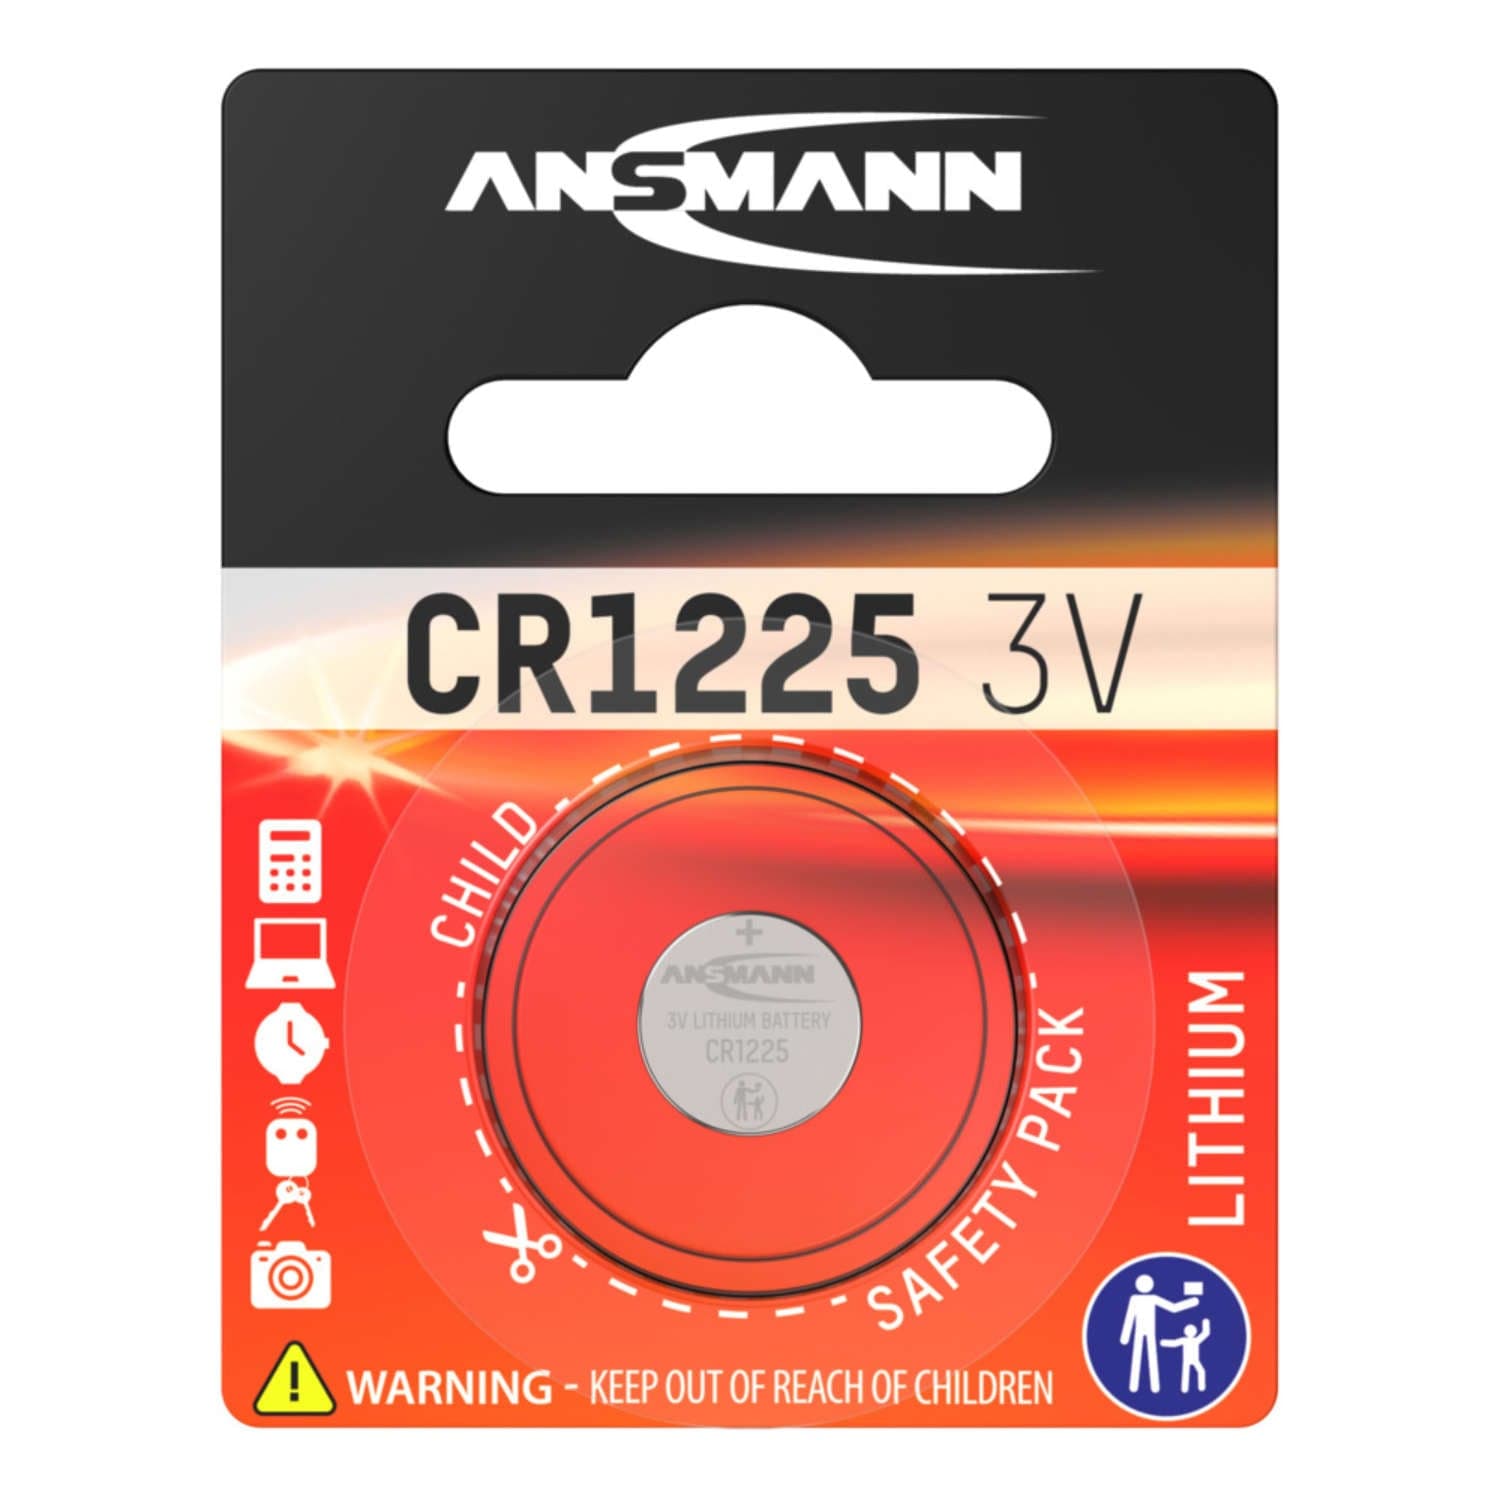 CR1225 3V Lithium Coin Cell Battery - The Pi Hut